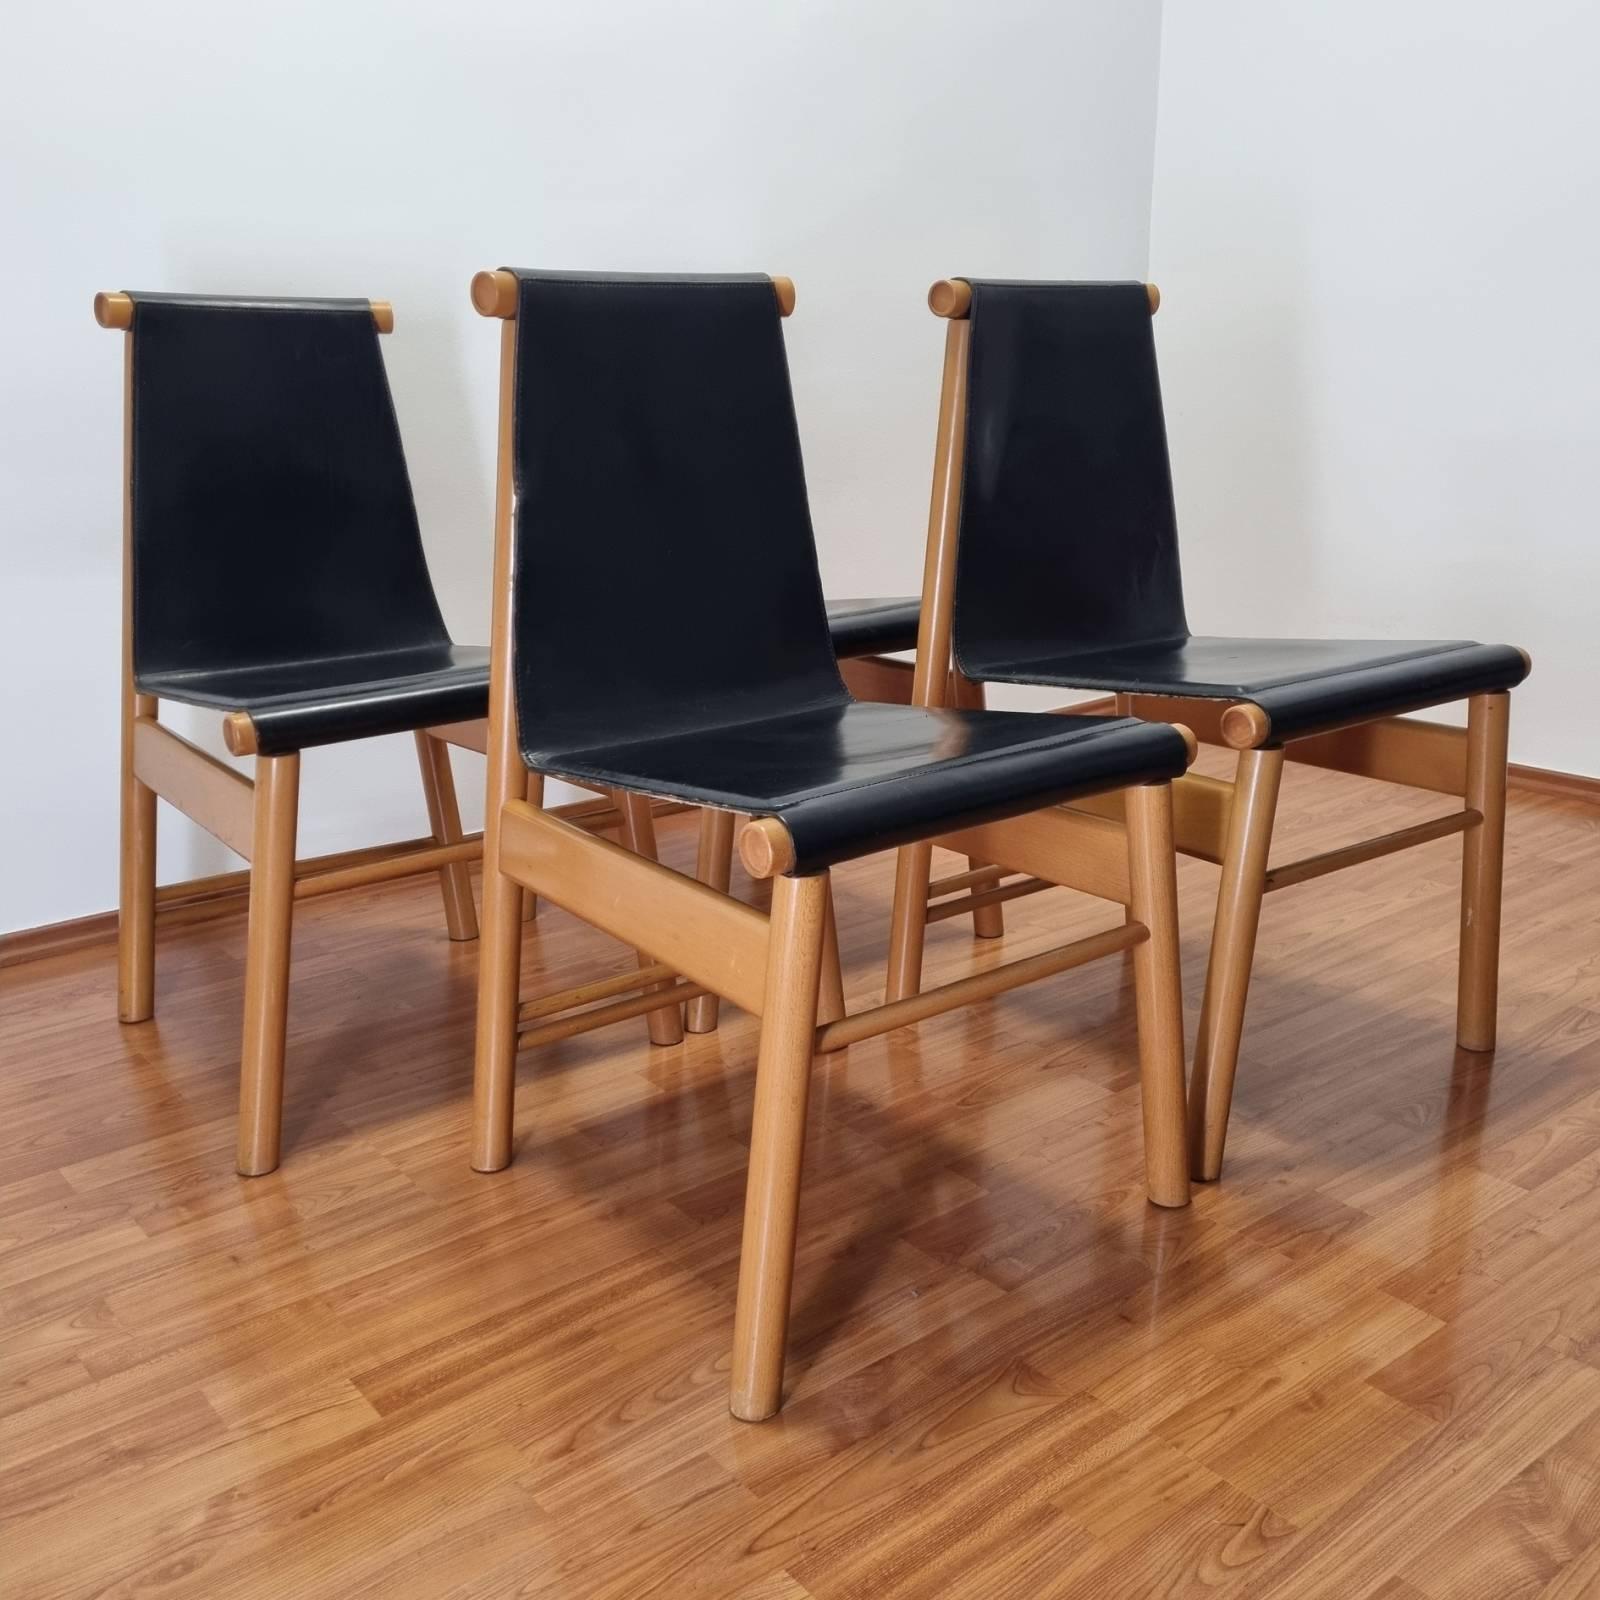 Scandinavian Modern Mid Century Wood and Leather Dining Chairs, Italy 70s, Set of 4 For Sale